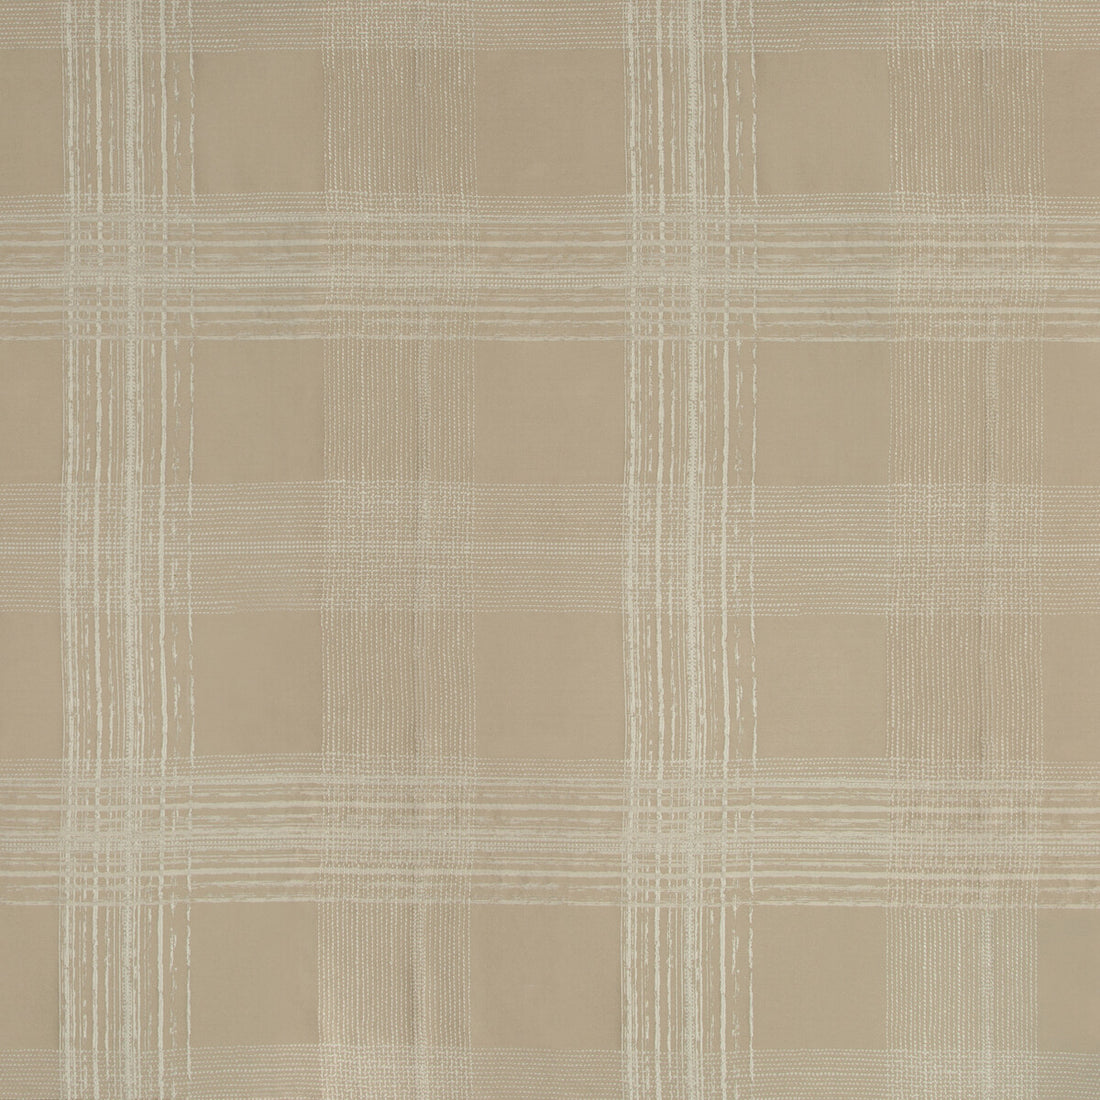 Refined Lines fabric in natural color - pattern 4452.11.0 - by Kravet Couture in the Izu Collection collection